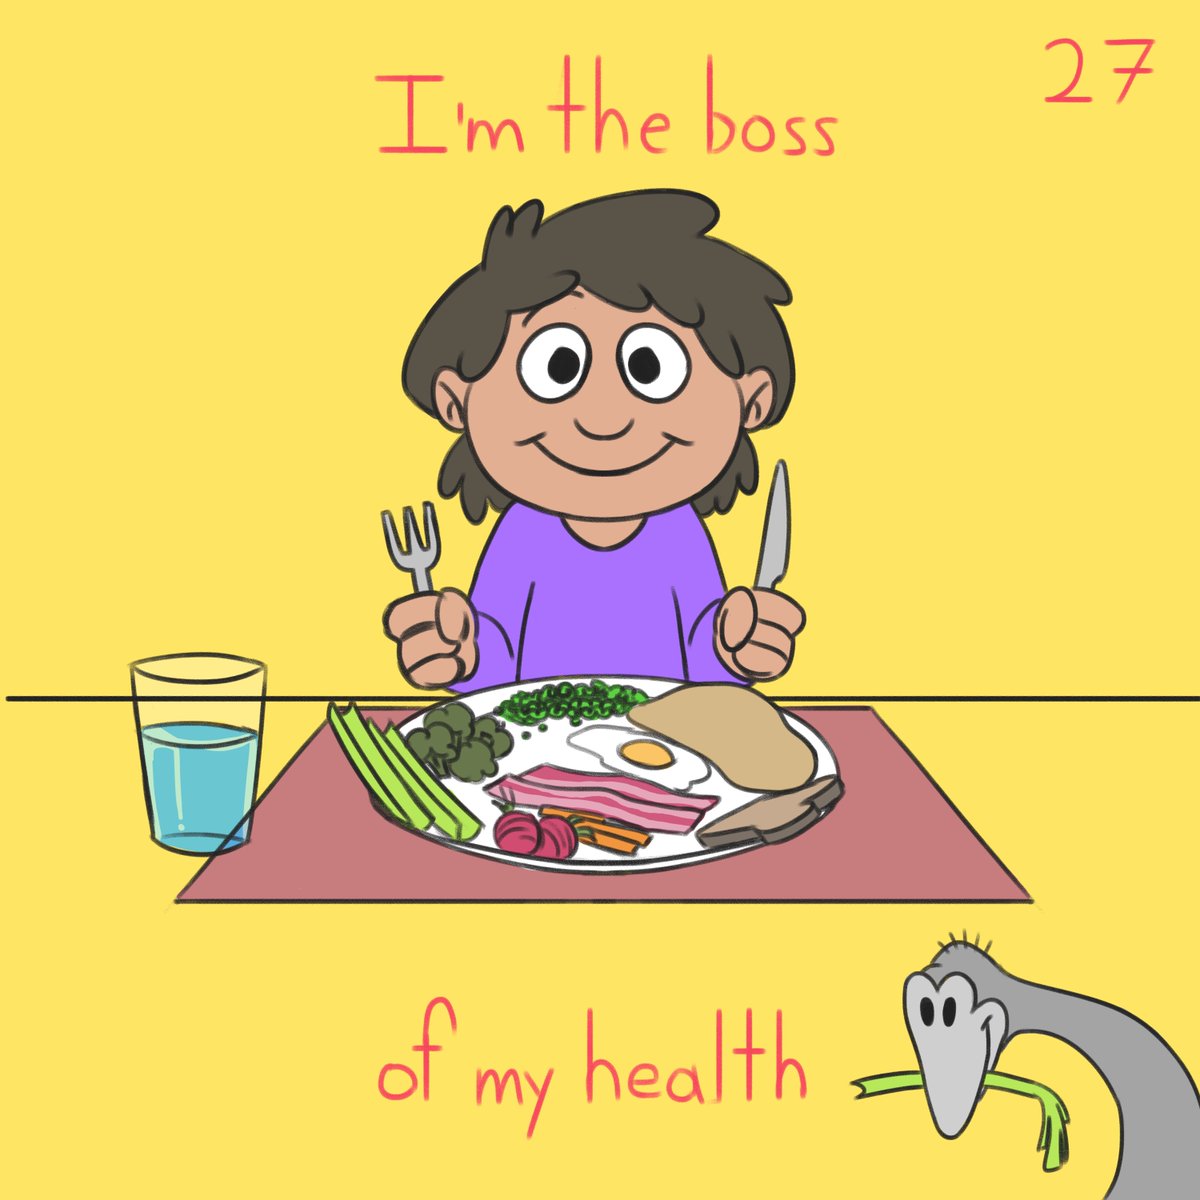 #Happy #NationalEatWhatYouWantDay! Be a #GoodBossOfYourMouth #KeepItHealthy! #Enjoy every bite! 🥦🥬🥕 imthebossofme.com Search #ITBOM on #Etsy #ImTheBossOfMe #ChildrensBooks #parenting #EarlyLearning #ChildhoodMemories #Repost #ReadWithJenna #HodaKotb #JBH #ReadWithUs